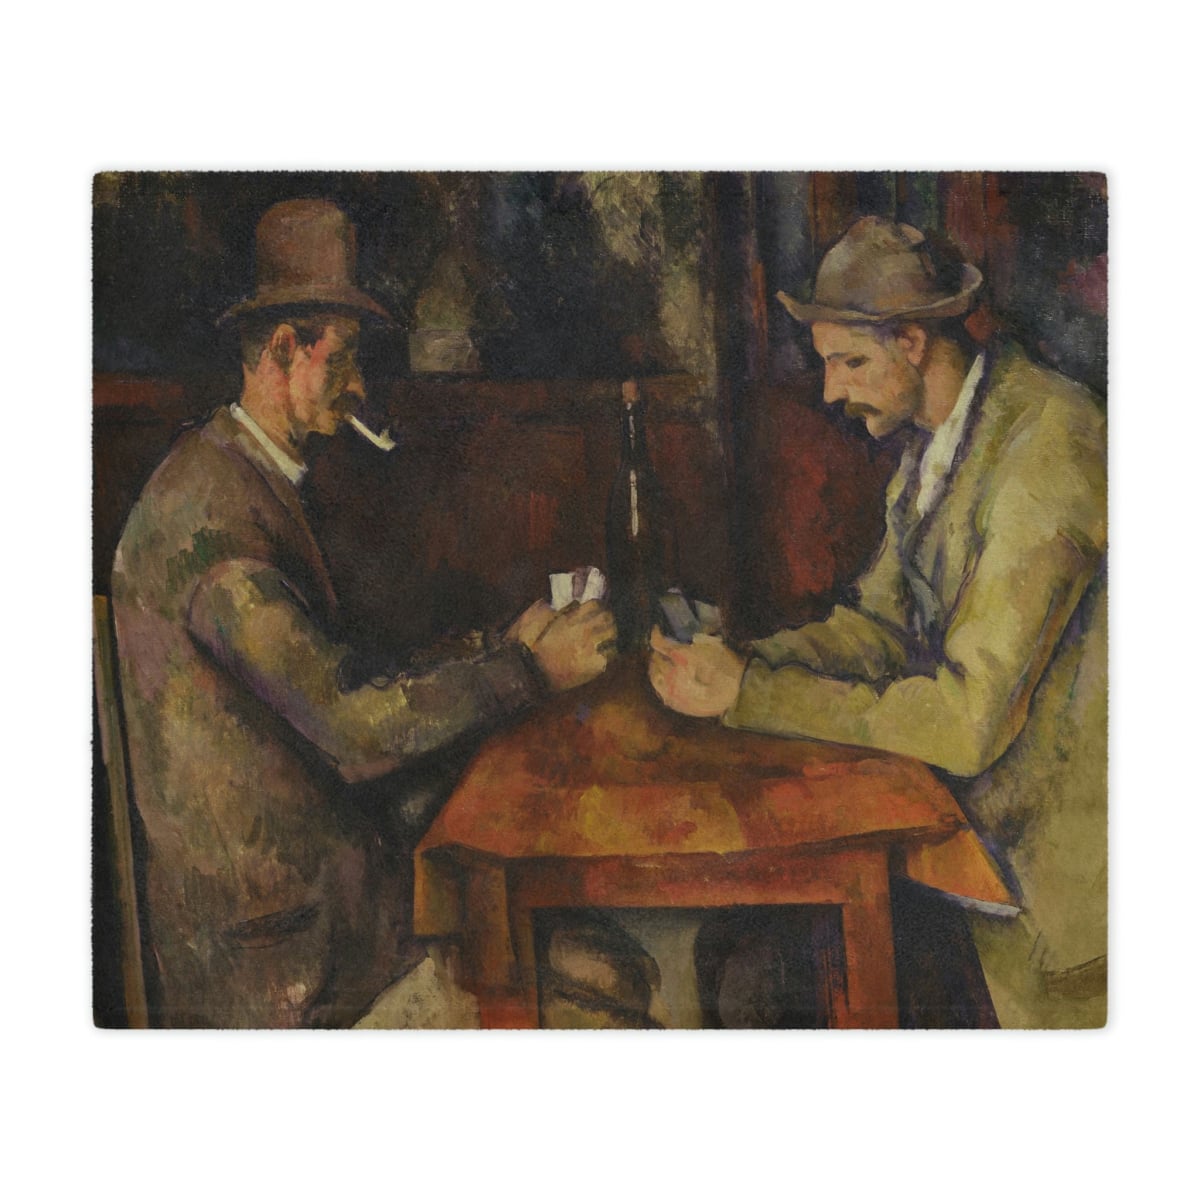 High-resolution reproduction of 'The Card Players' by Paul Cézanne